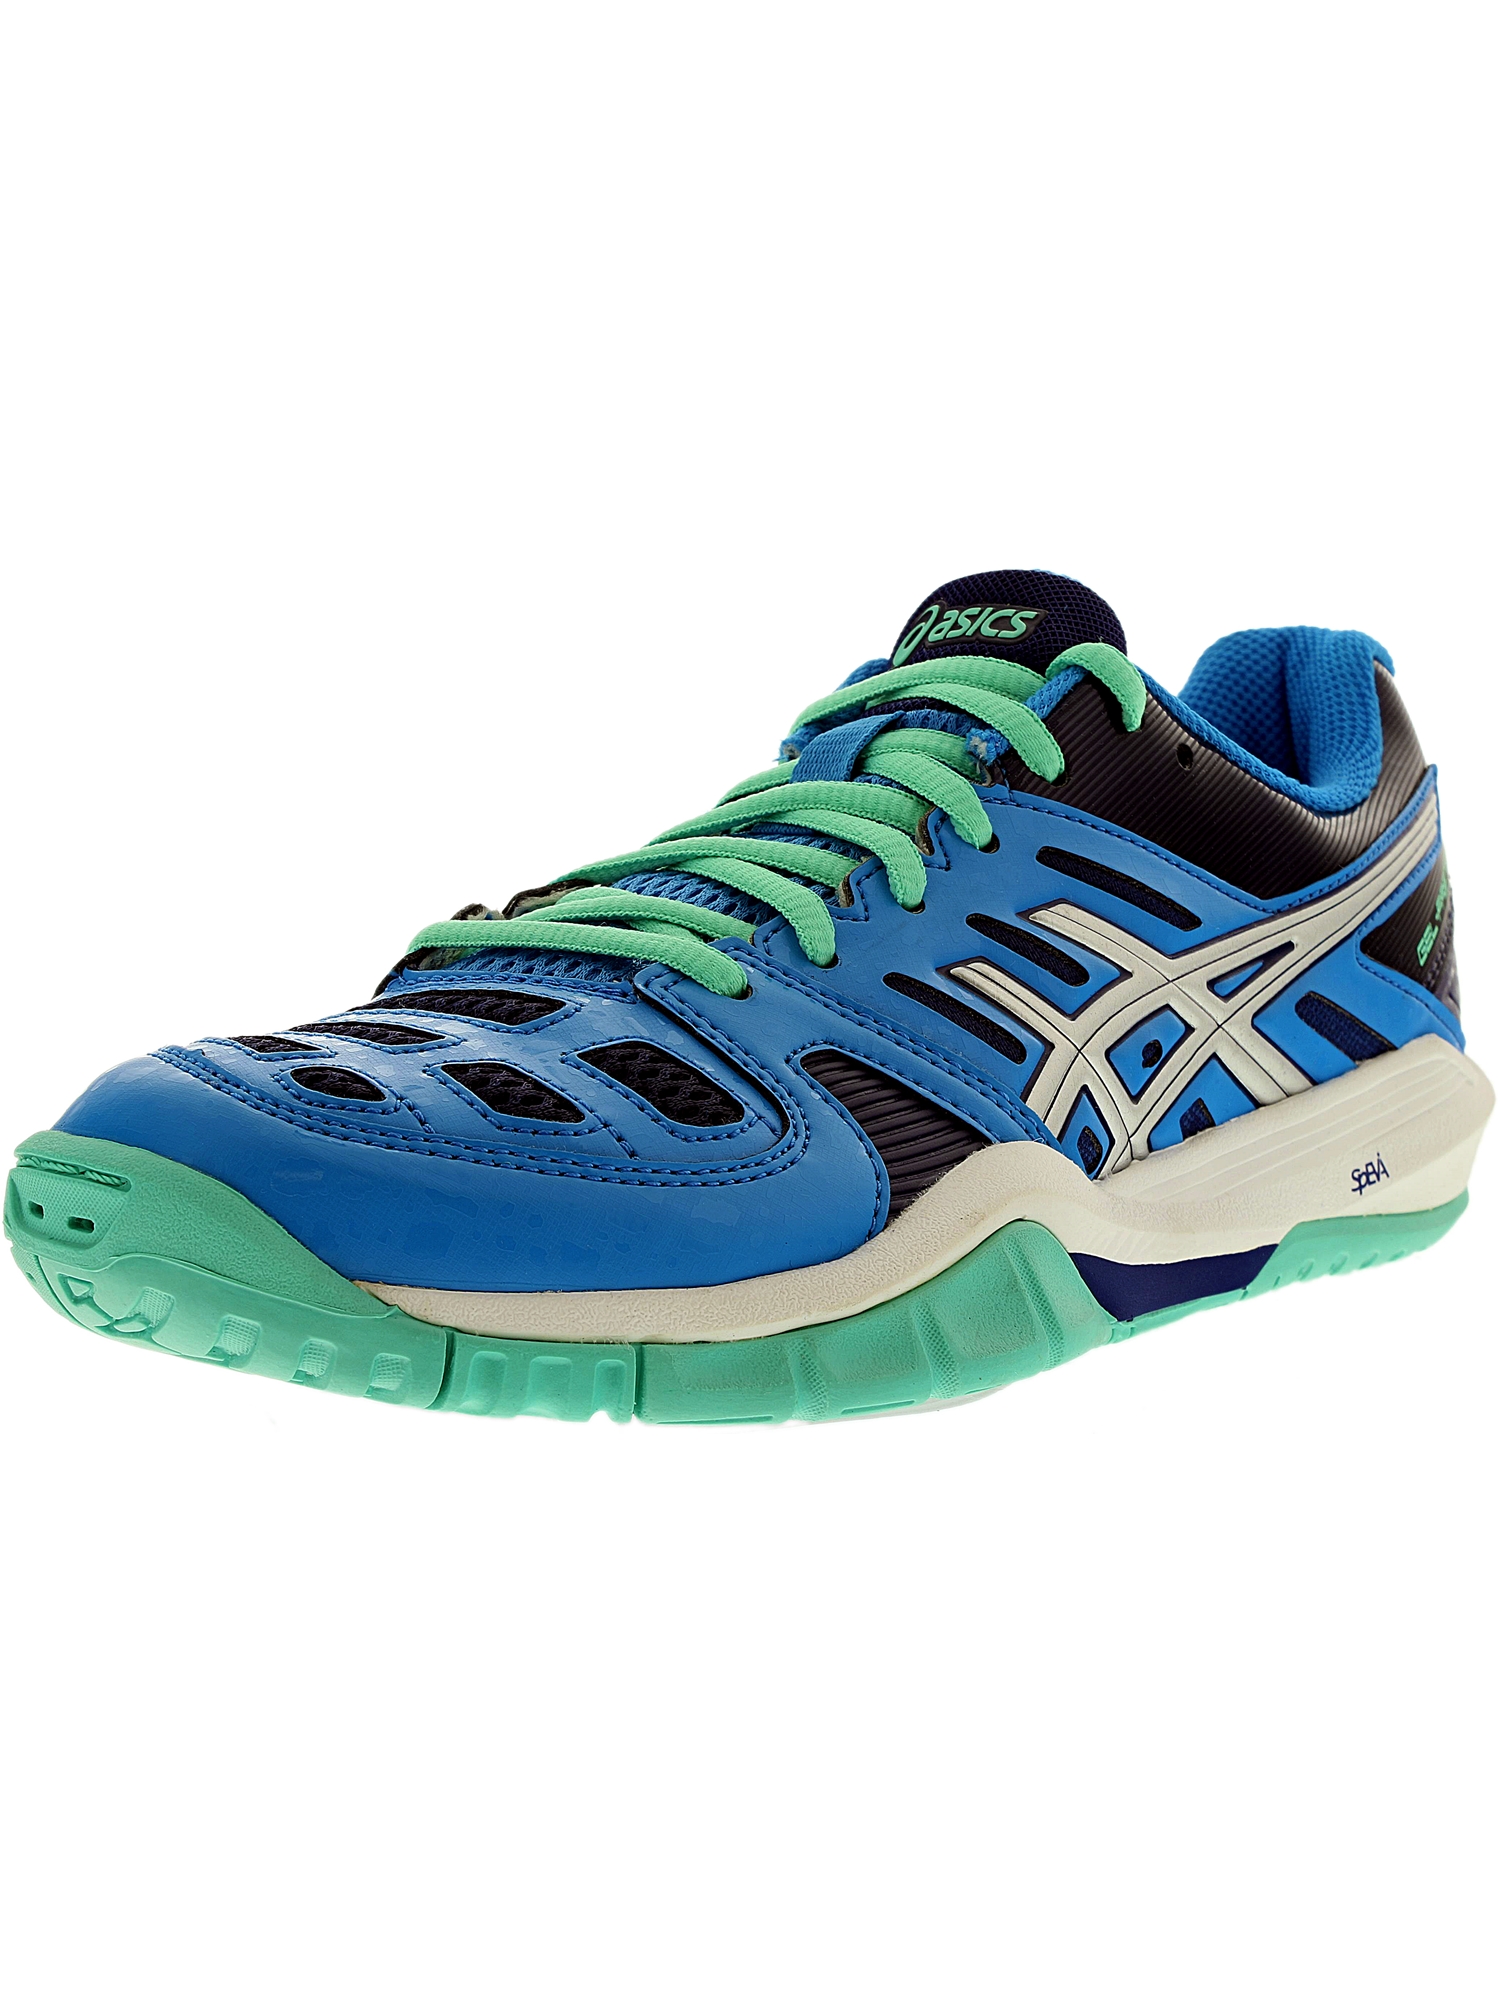 Asics Women's Gel-Fastball Turquoise/Silver/Aqua Mint Ankle-High ...